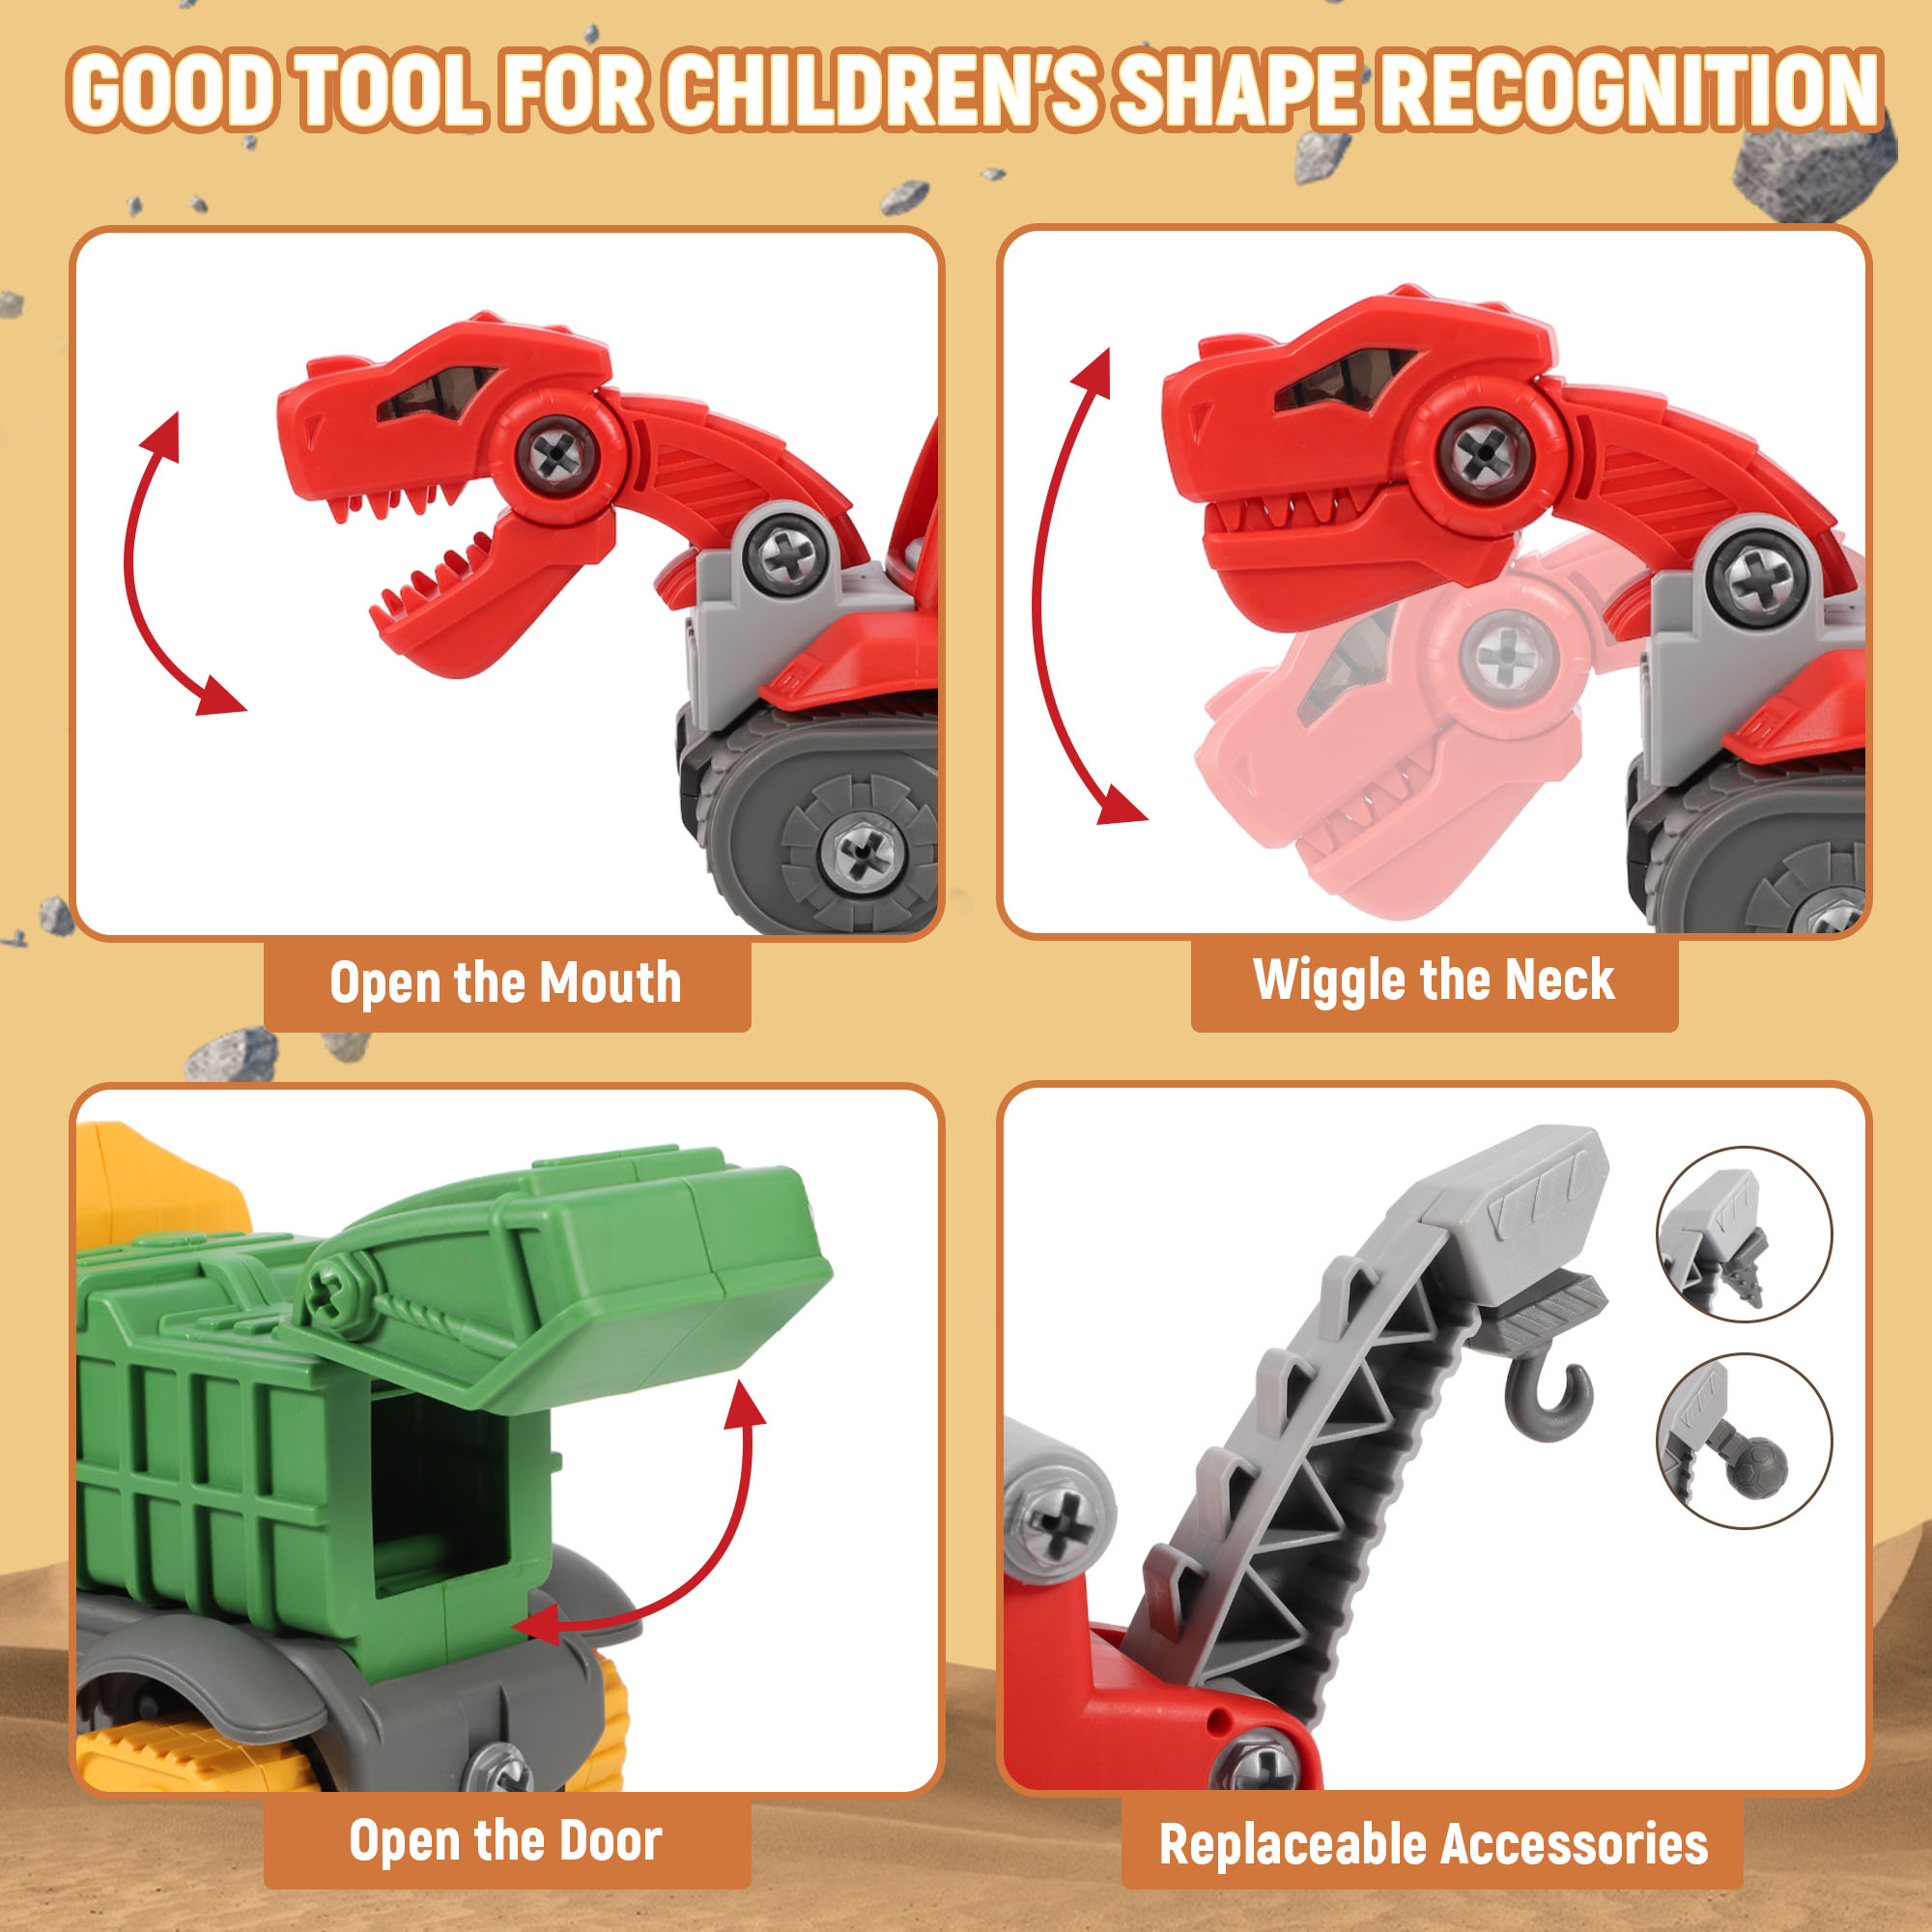 Wisairt STEM Toys,Take Apart Dinosaur Toys with Electric Drill for Kids,Building Toys for Boys Girls Age 3+ Birthday Party Gifts(5 Pack) - image 3 of 9